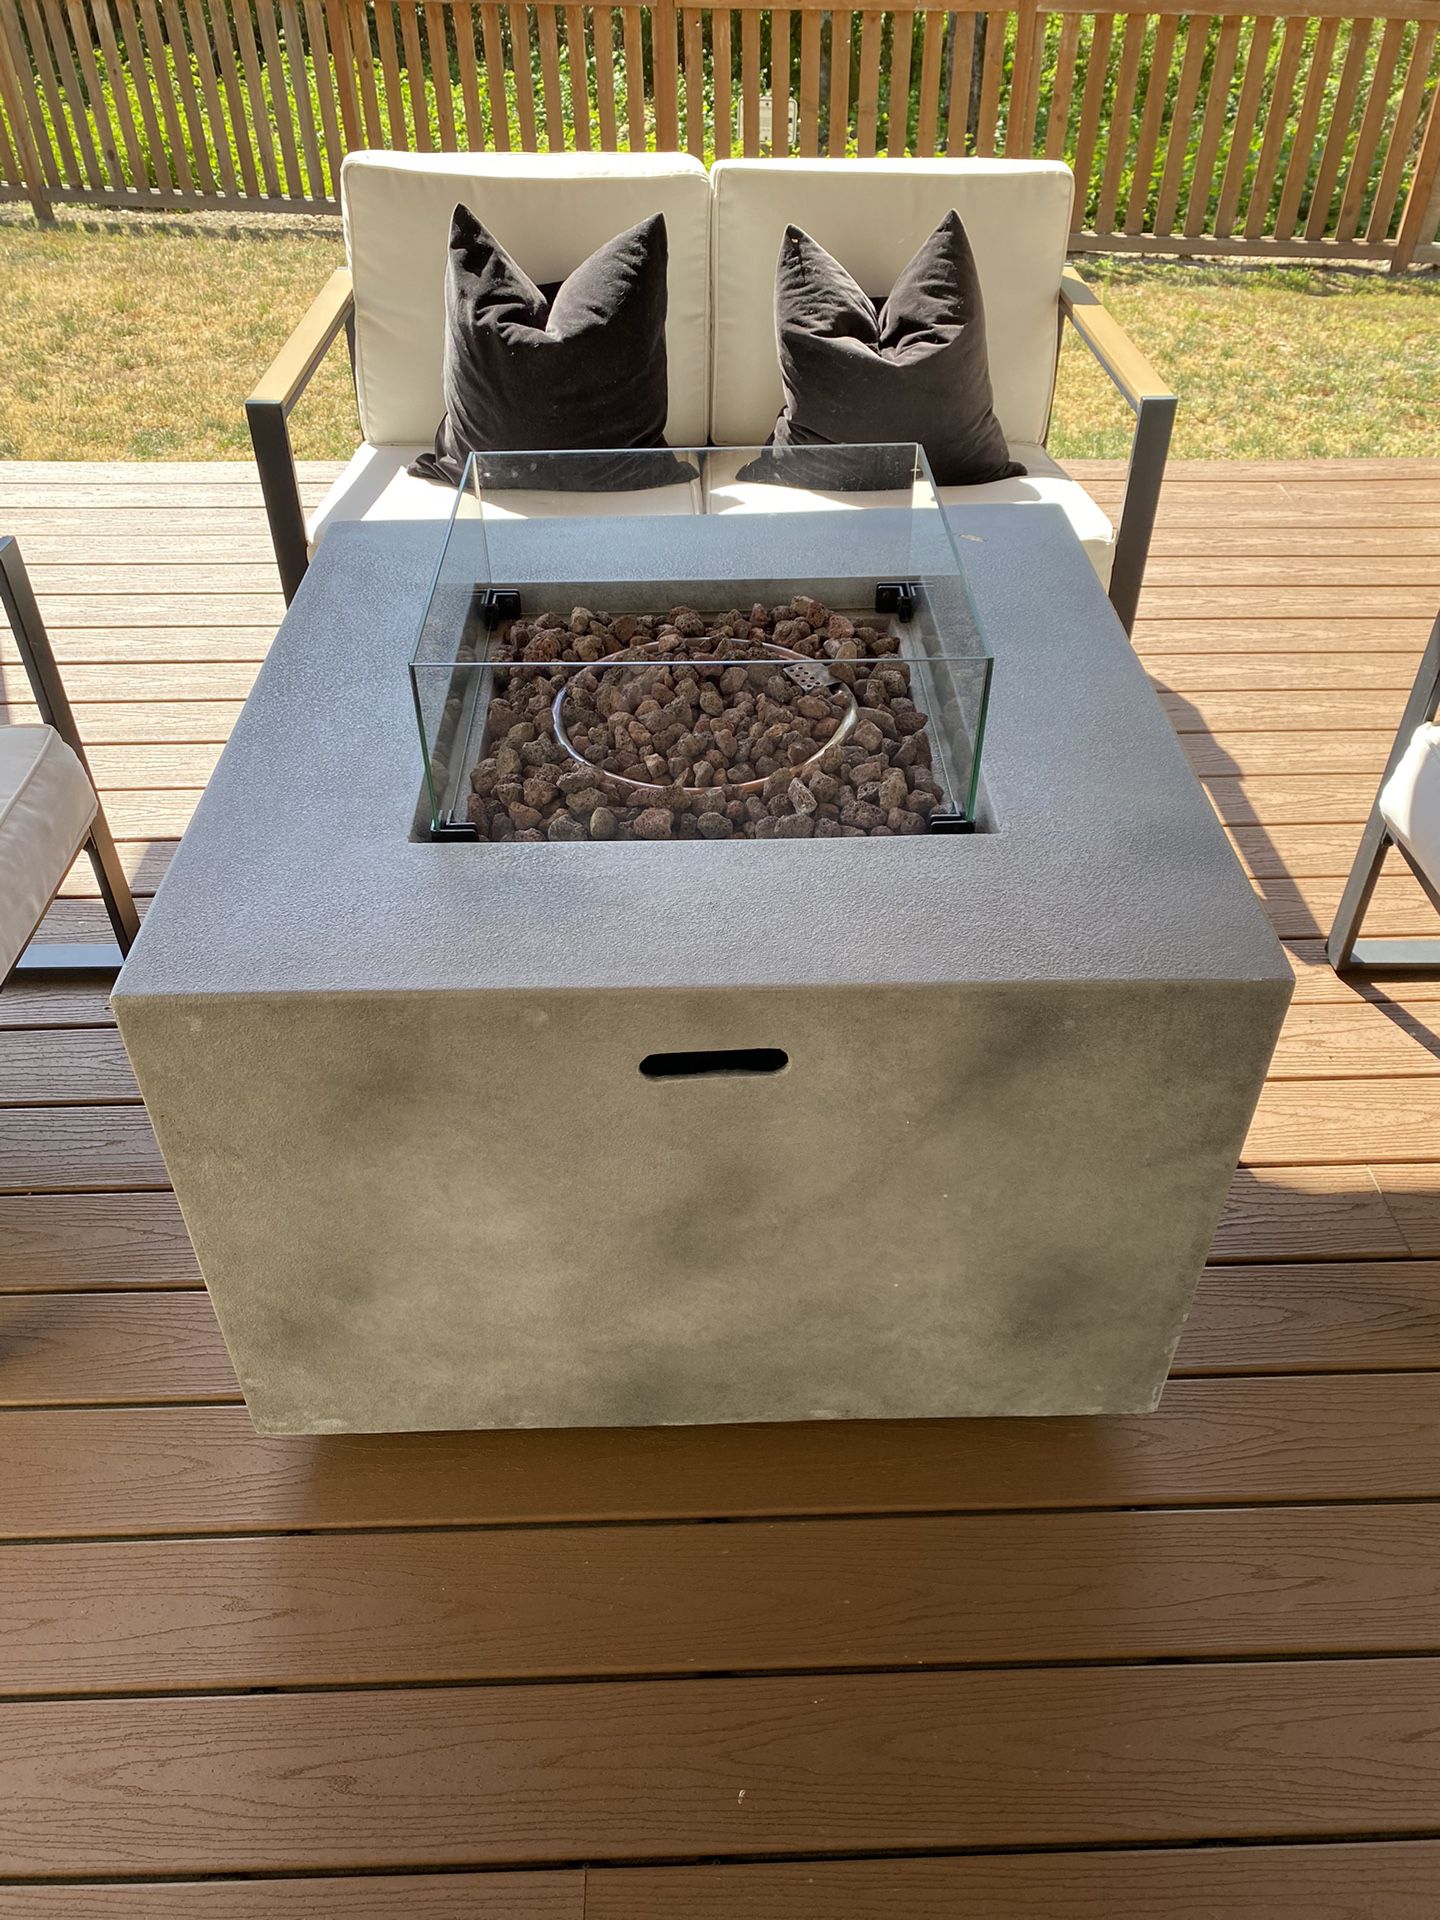 OUTDOOR GAS FIREPIT